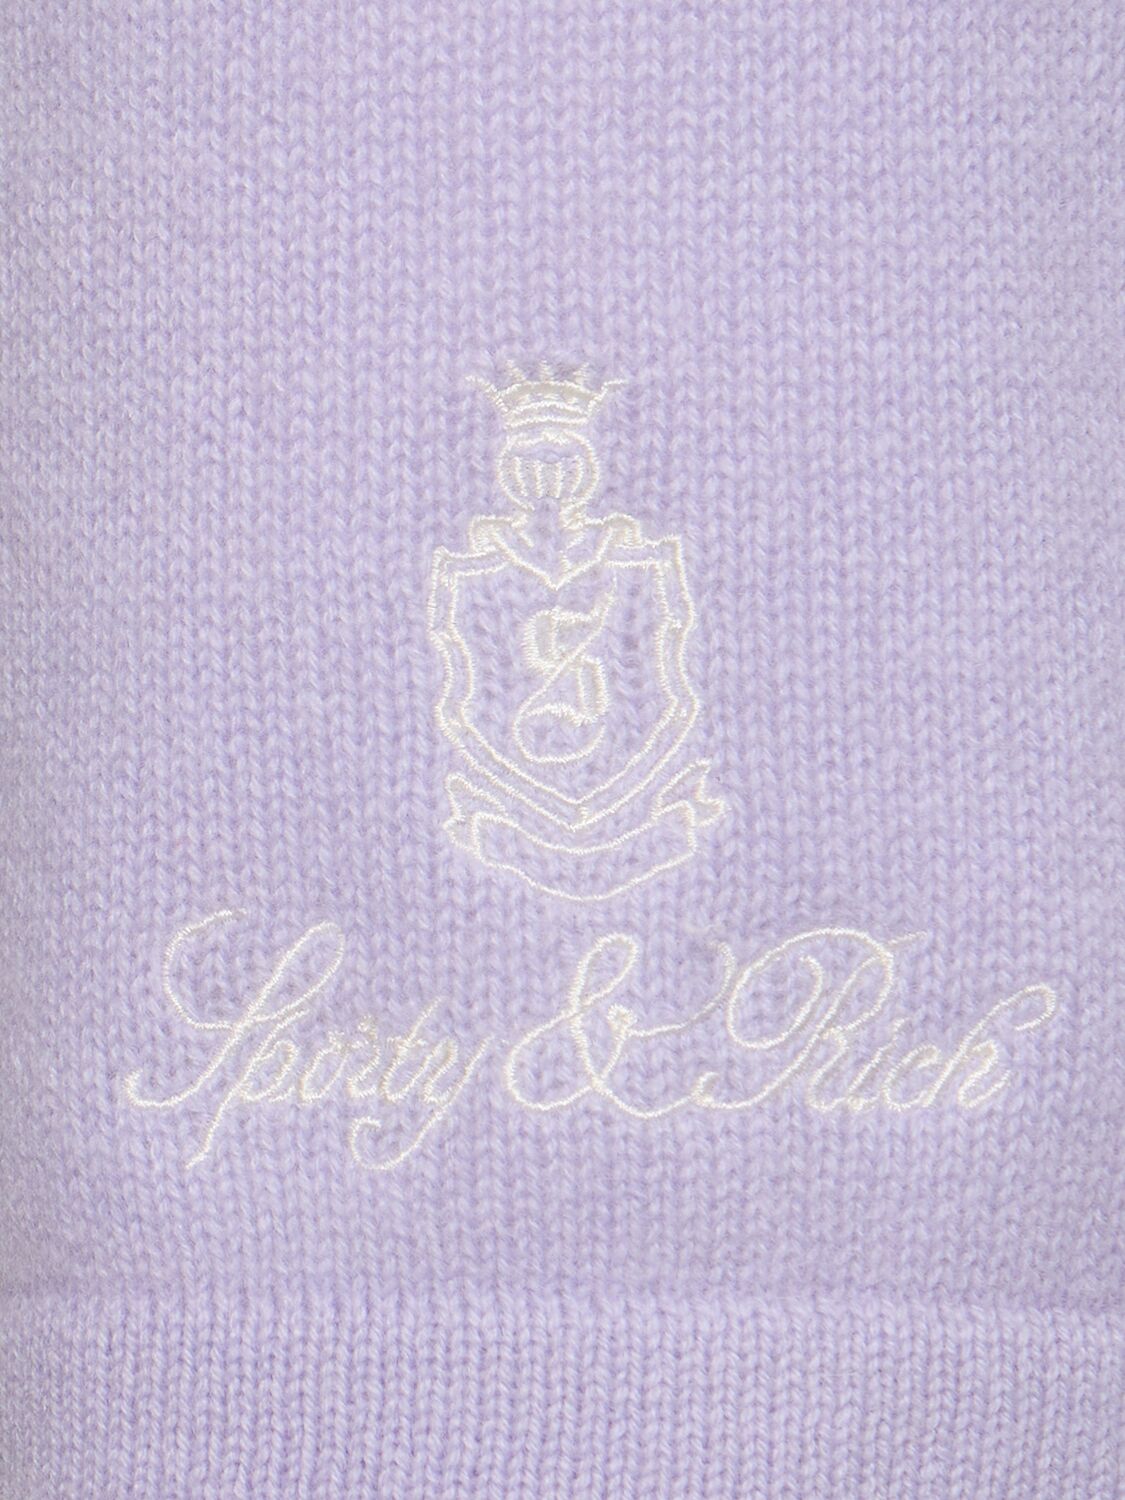 Shop Sporty And Rich Vendome Cashmere Shorts In Lilac